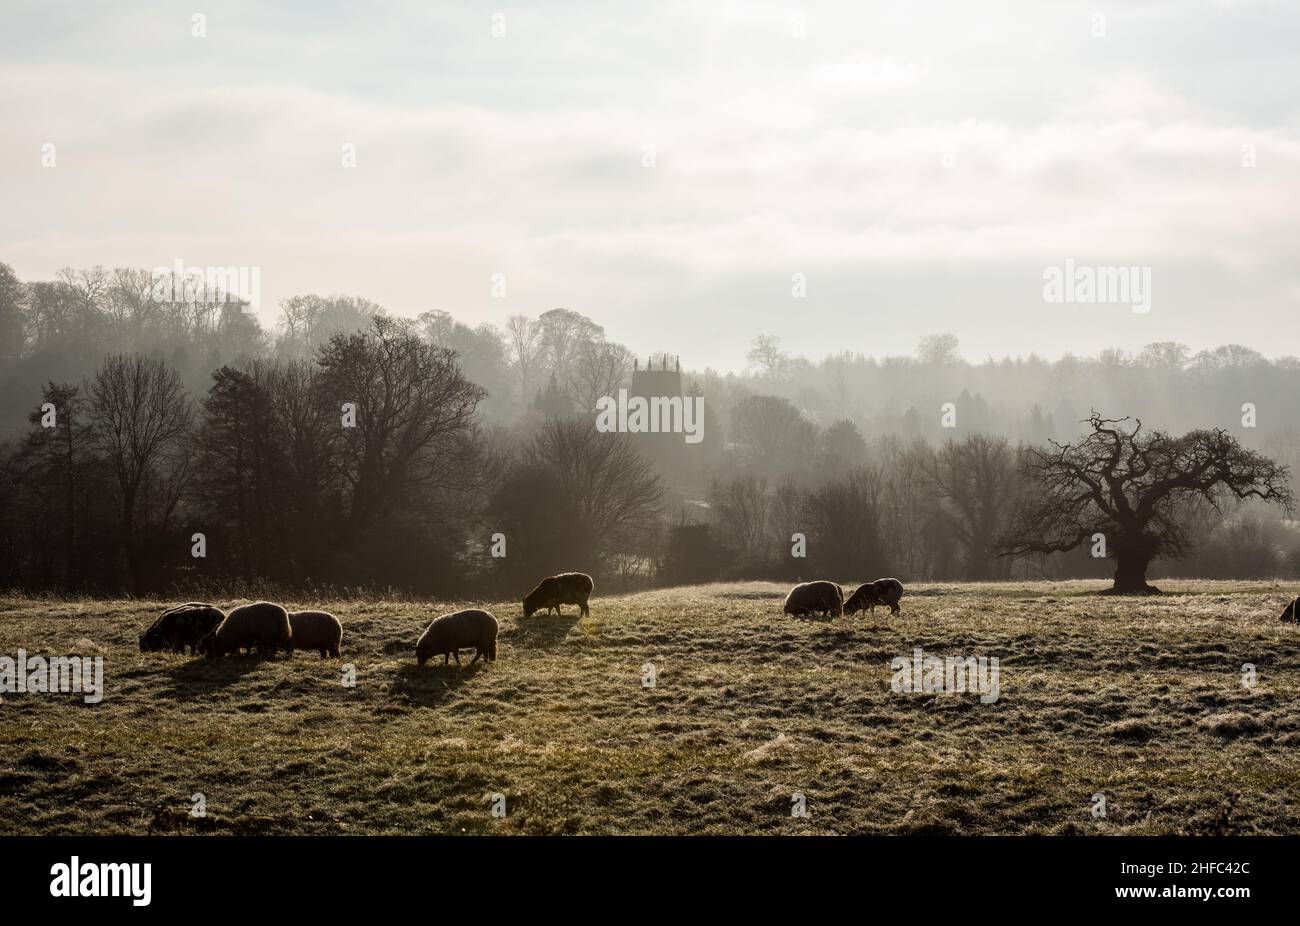 Woolsthorpe, Vale of Belvoir, UK. 15th Jan 2022. The Church of St James in the fog at Woolsthorpe in the Vale of Belvoir. Neil Squires/Alamy Live News Stock Photo